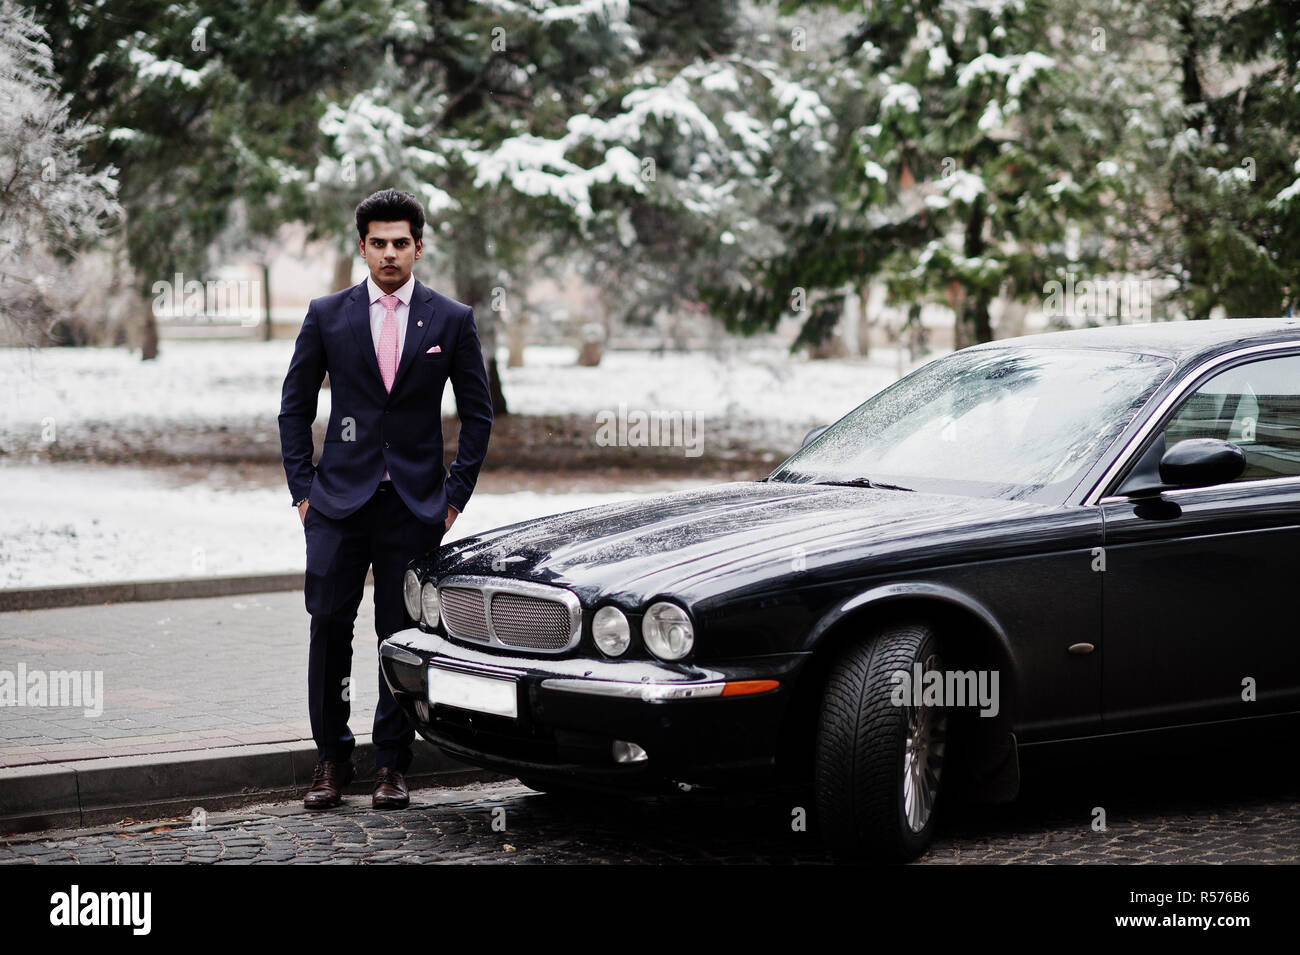 Elegant indian macho man model on suit and pink tie posed against black classic car. Stock Photo